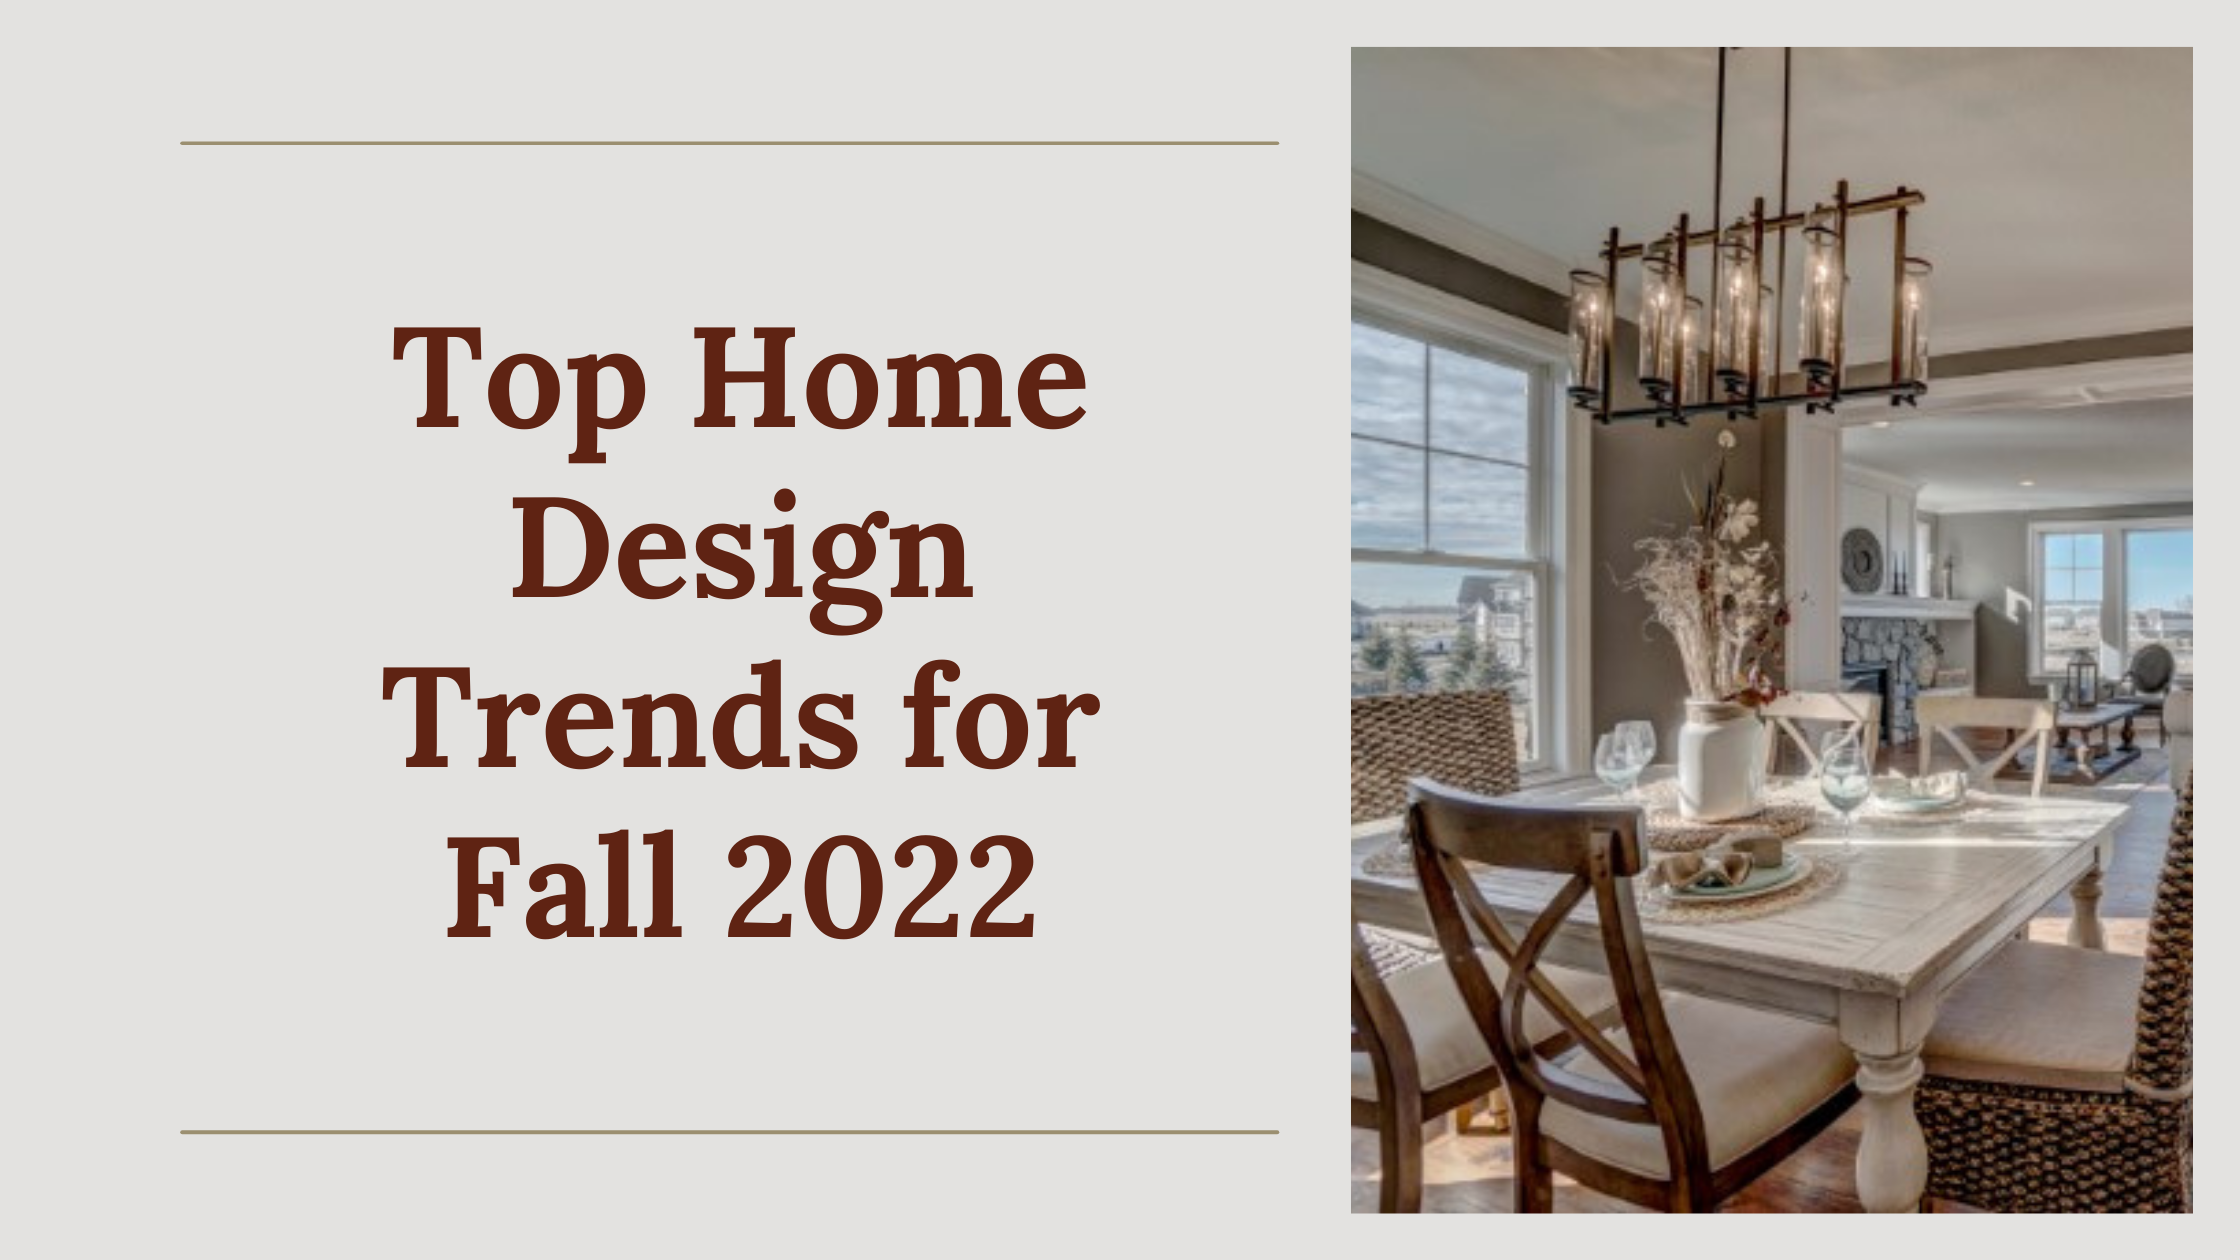 Top Home Design Trends for Fall 2022